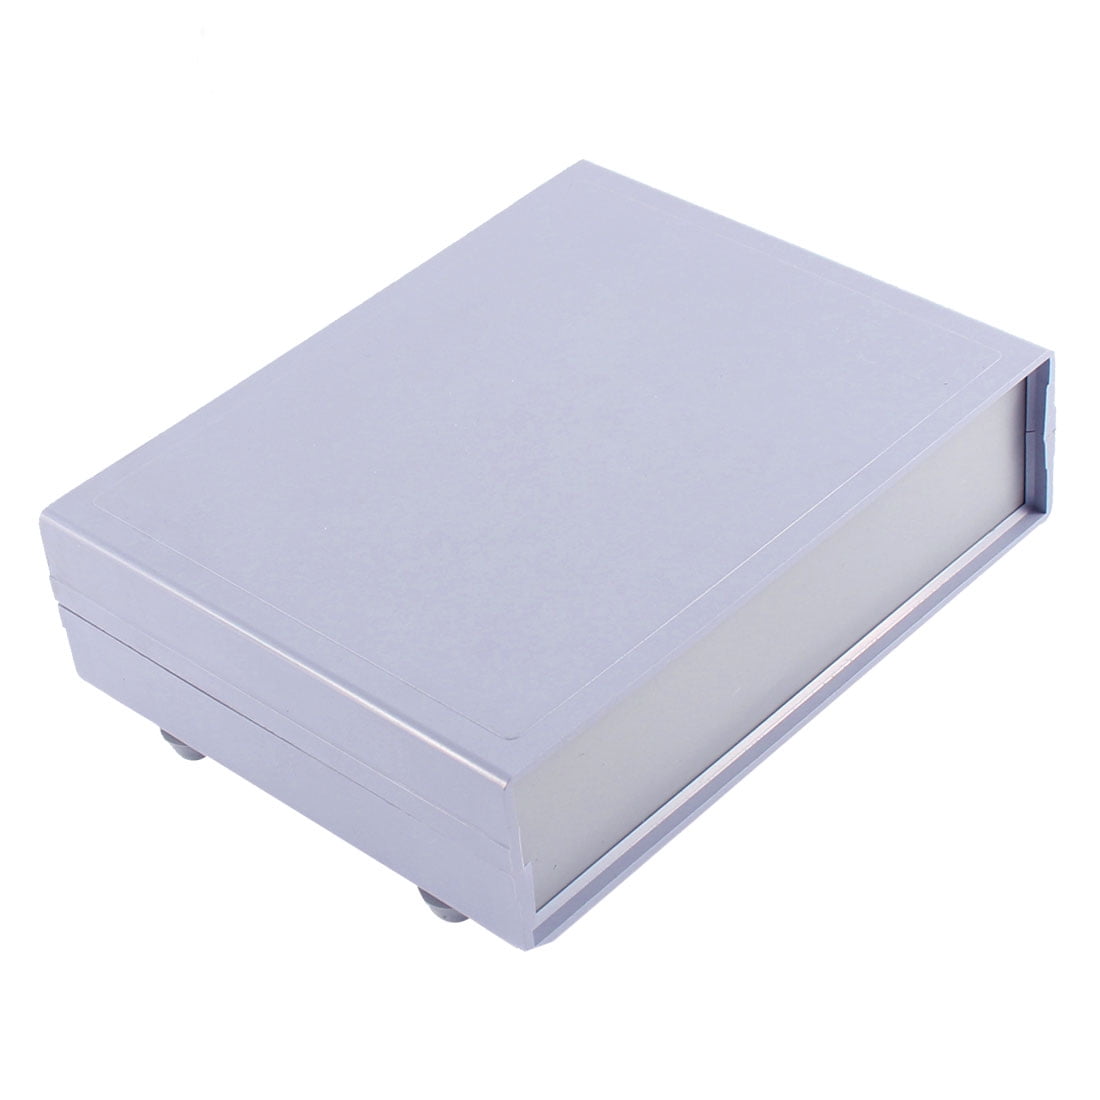 Waterproof Electronic Project Box Enclosure Plastic Cover Case 150x120x40mm 